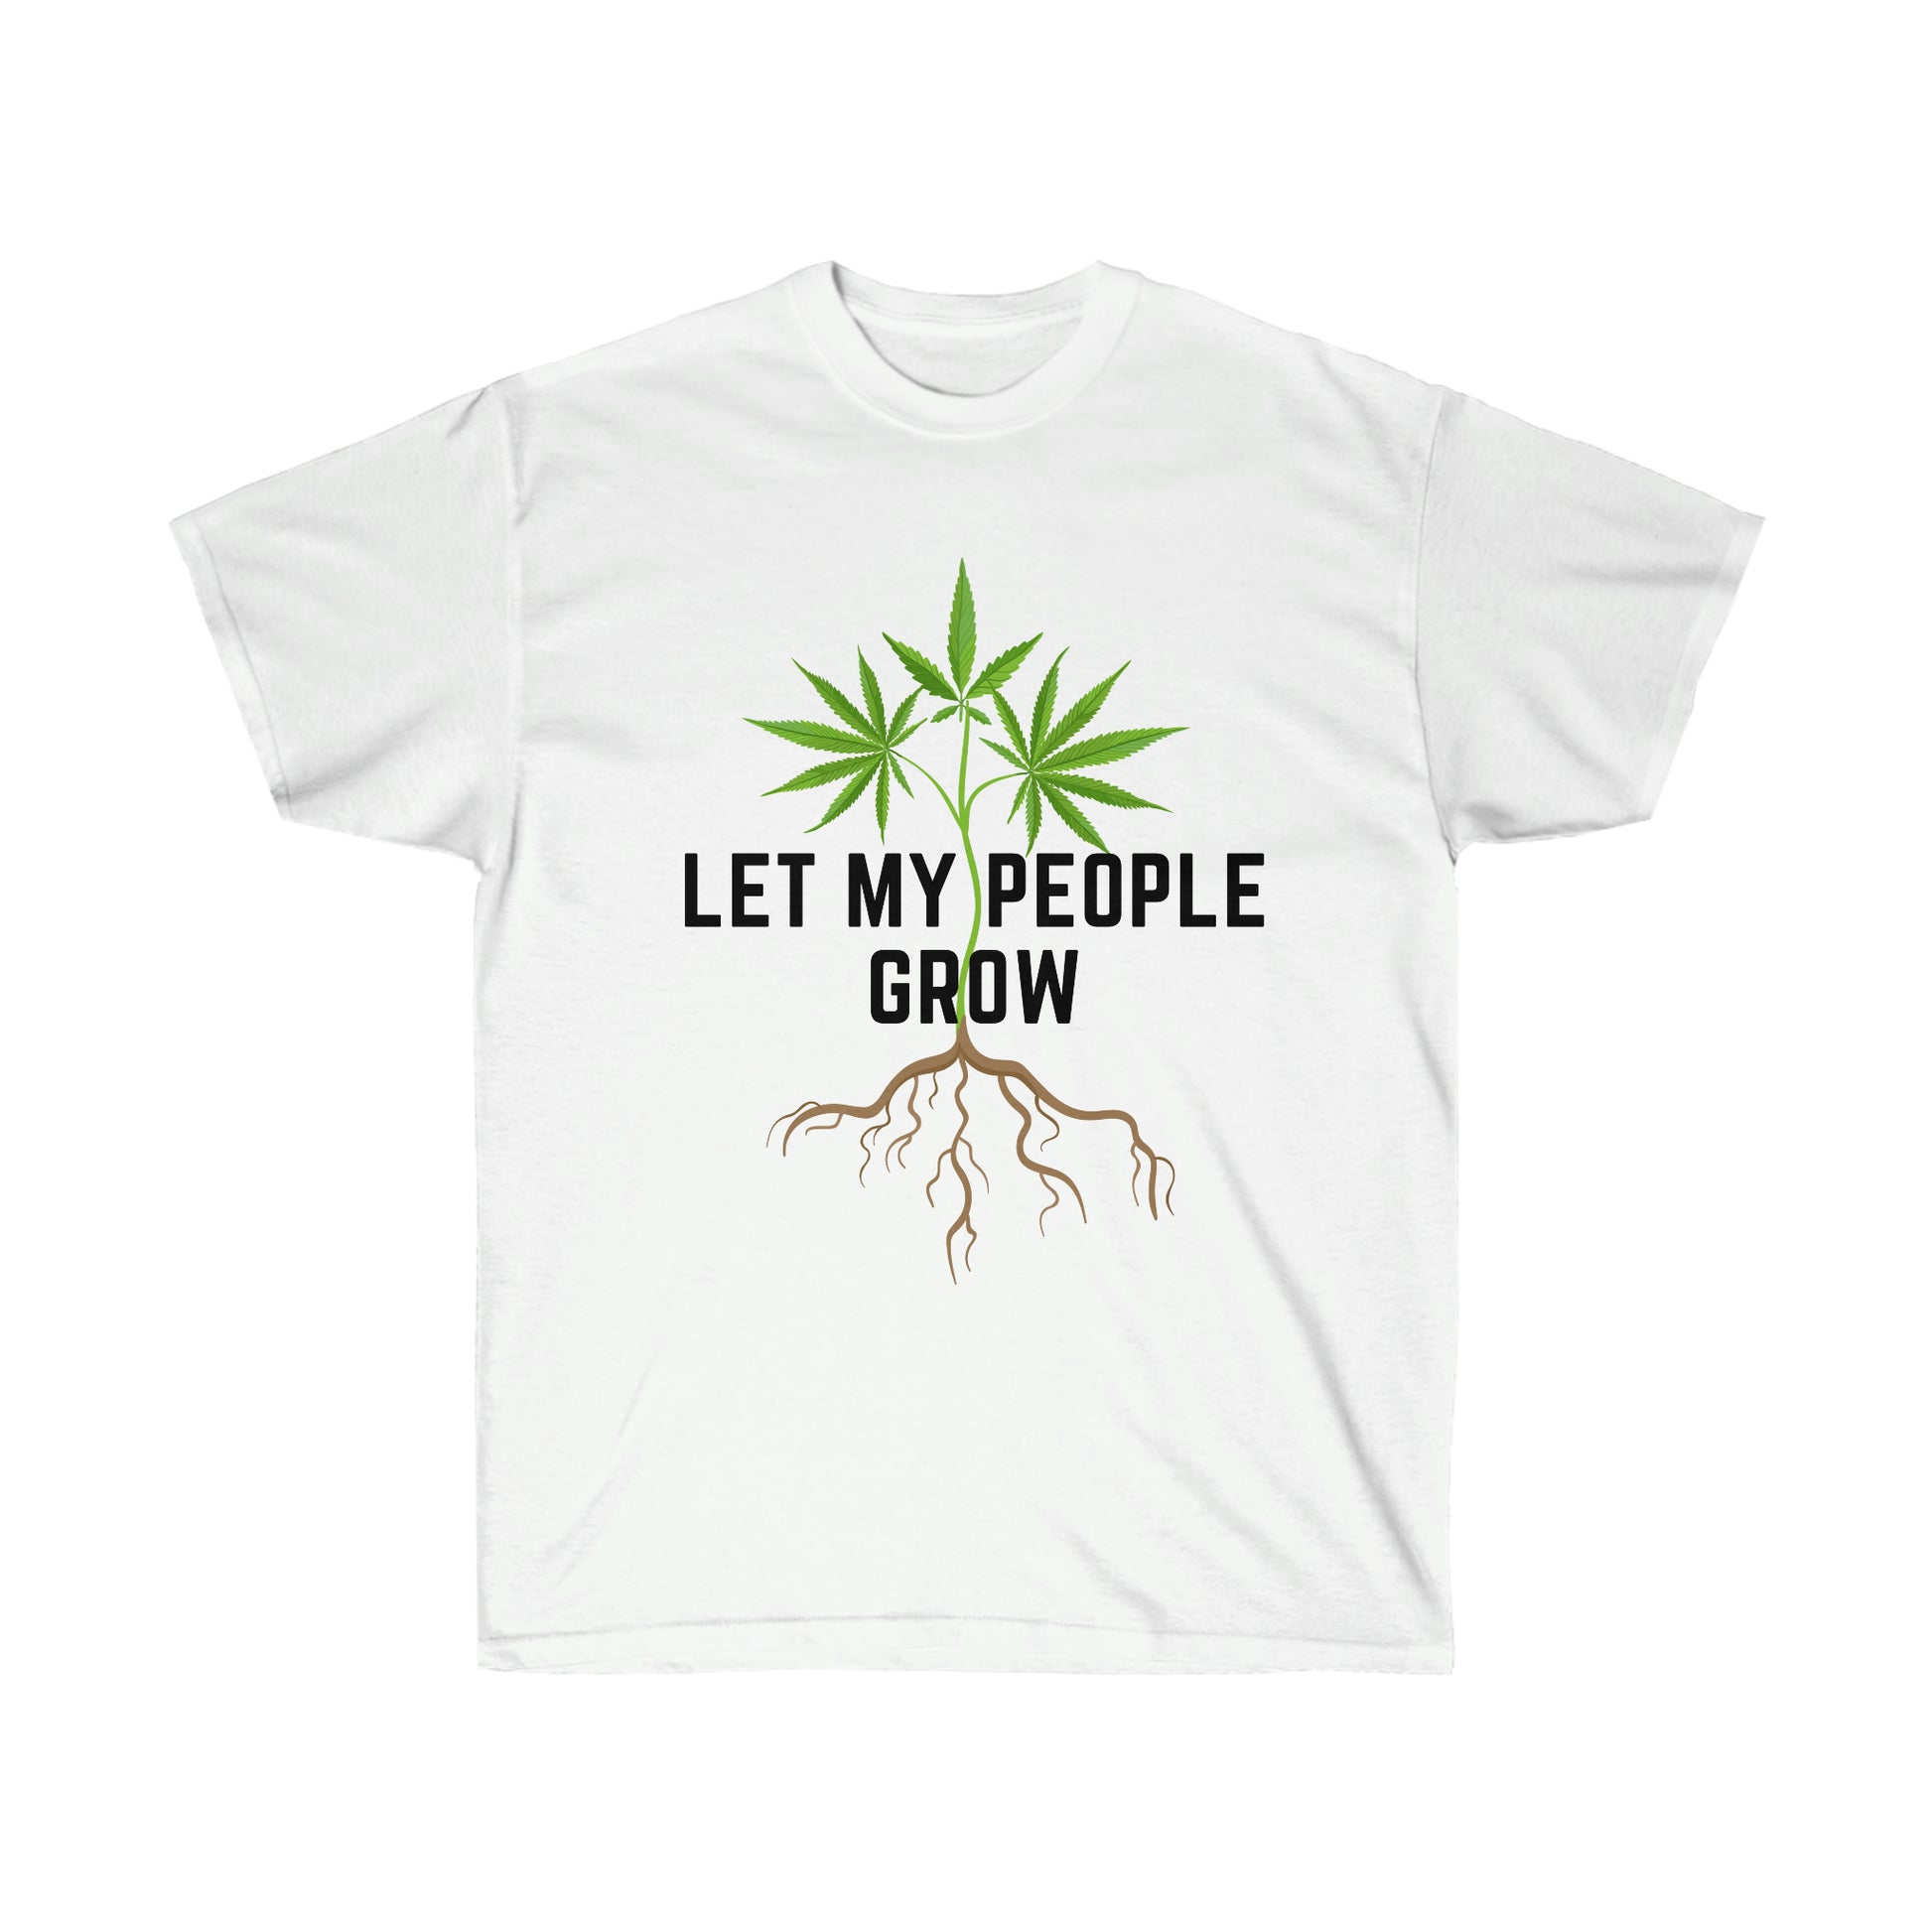 Let the Let My People Grow T-Shirt.